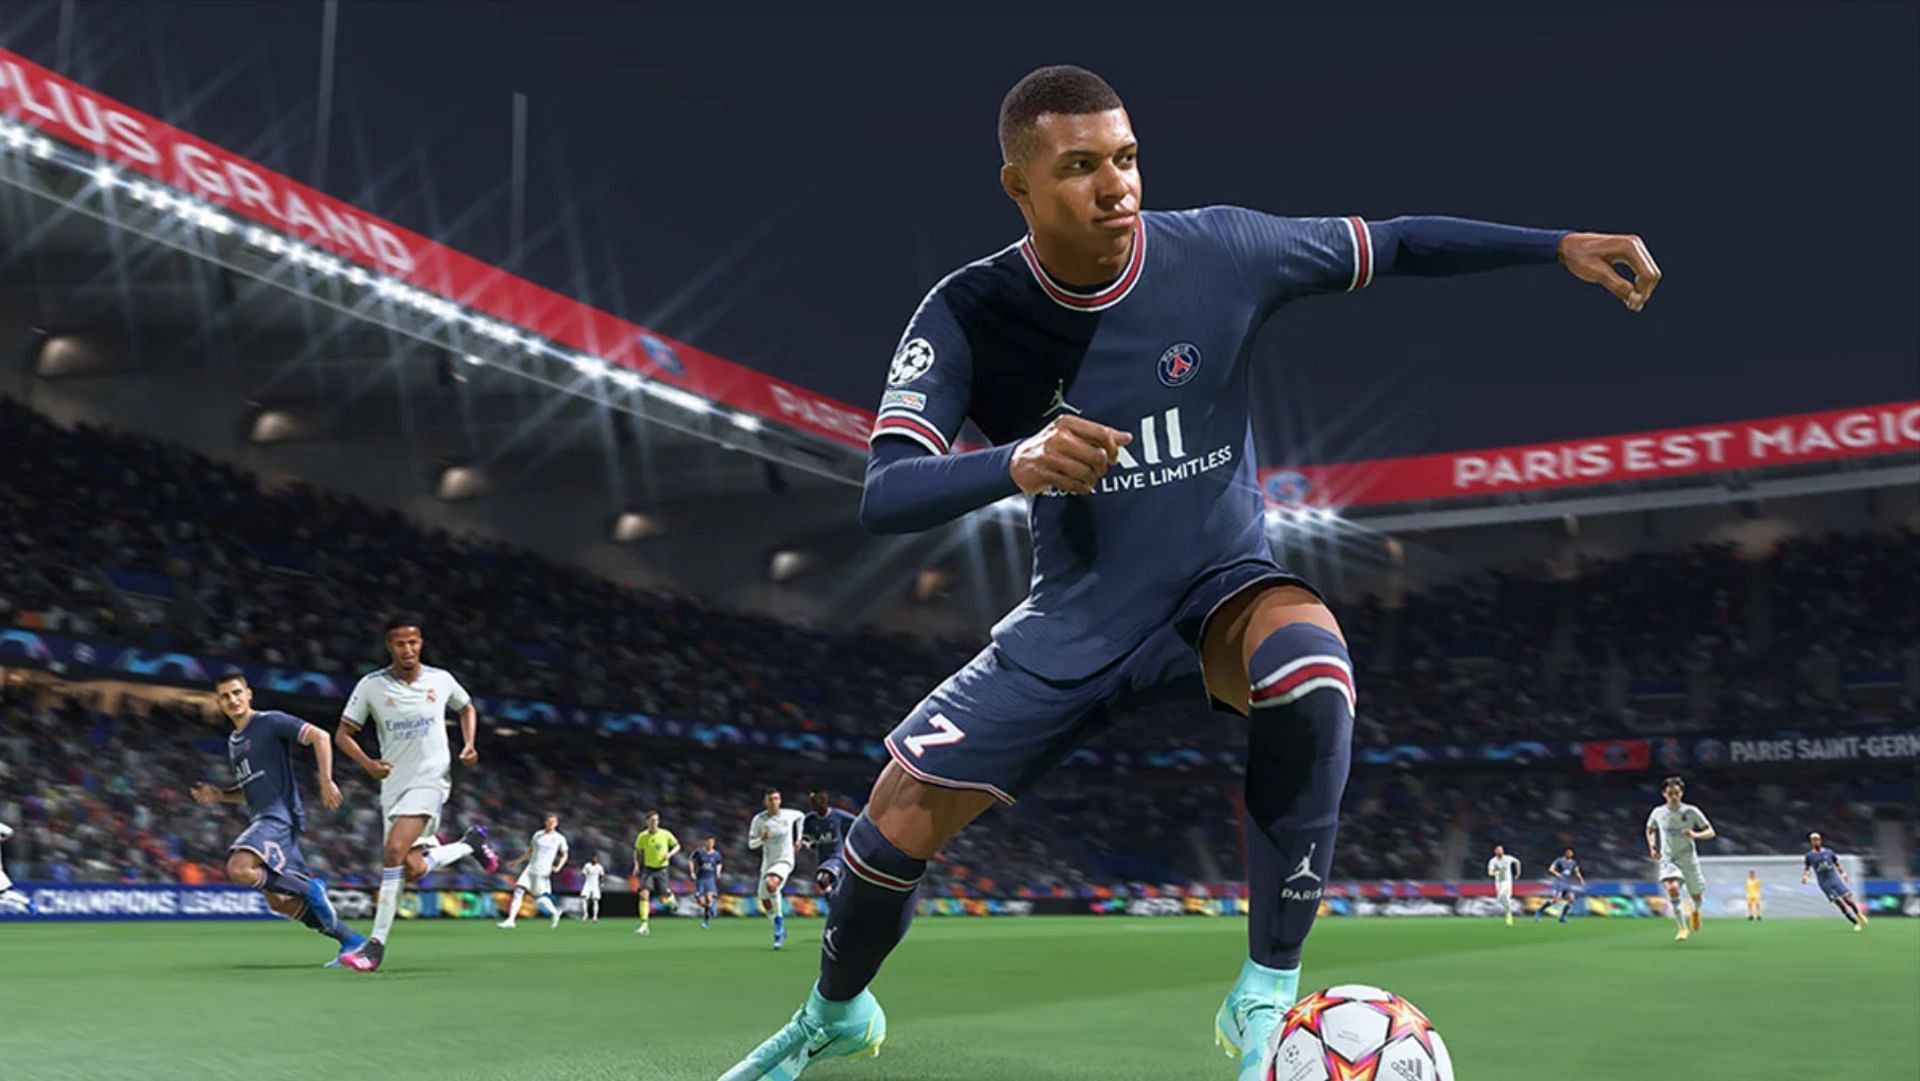 Mbappe is once again the paciest player in the game (Image via EA Sports)